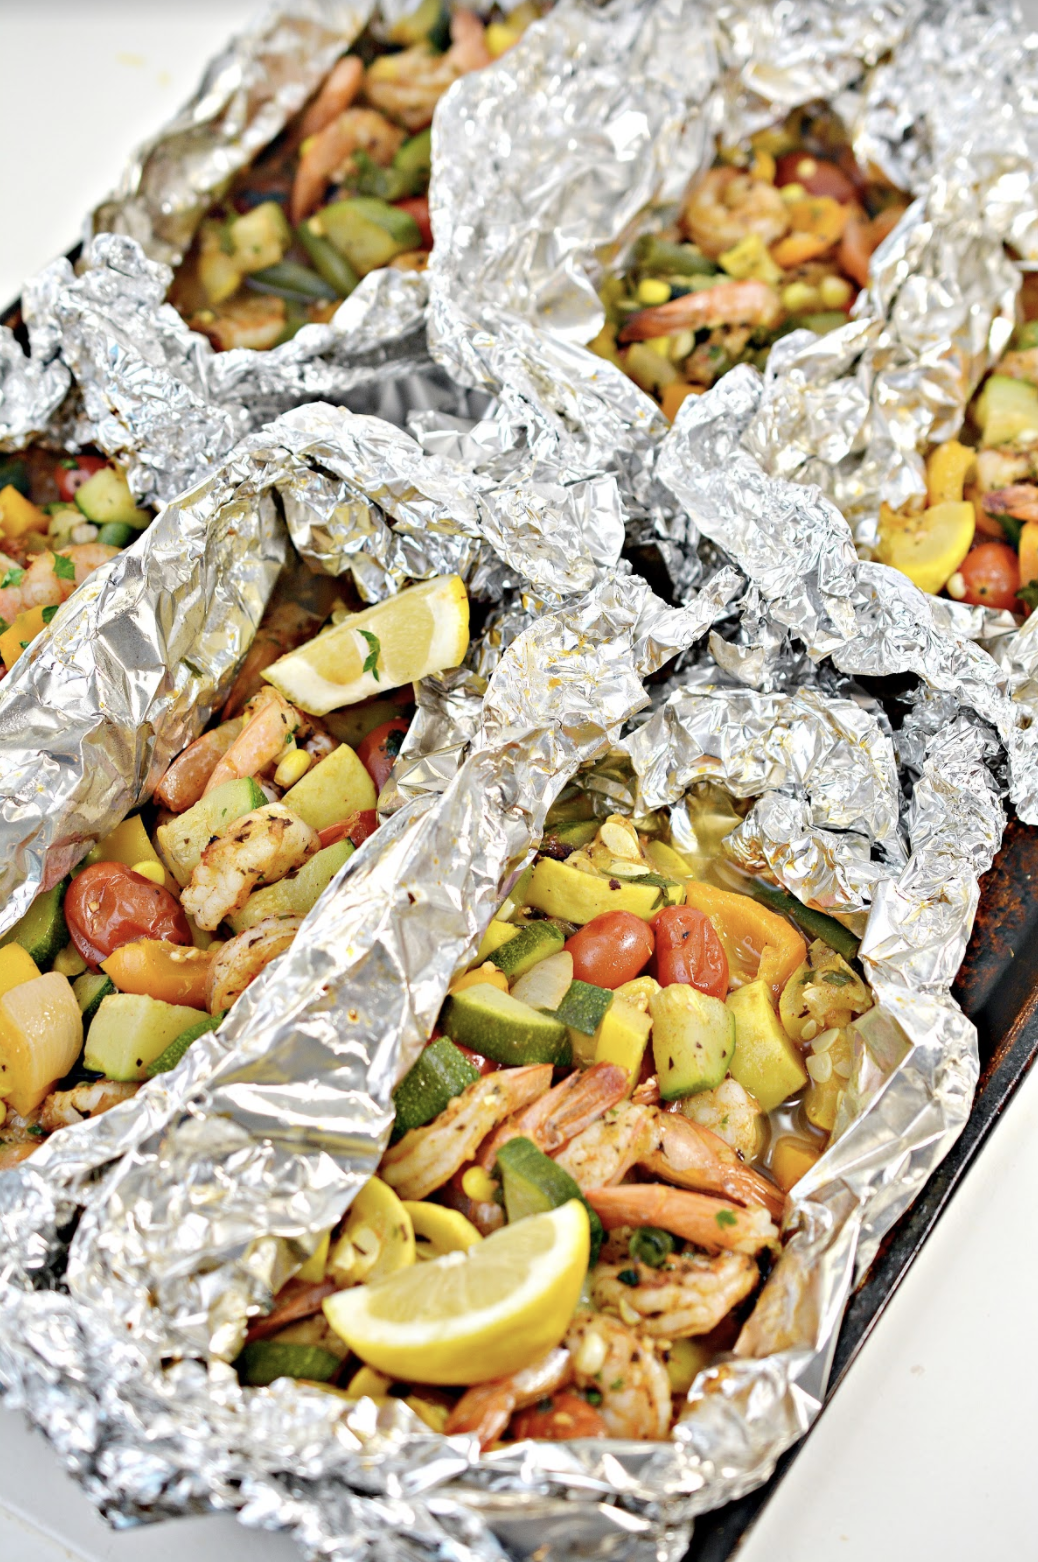 You'll love this flavorful, easy to make Shrimp and Veggie Foil Packs recipe - perfect for a weeknight dinner or your next summer cookout! #sidedishes #foilpacks #foilpackets #shrimprecipe #shrimpandveggies #summershrimp #summercookouts #dinner #lunch #summerbbq #bbq #easyrecipes #yummy #meltinmymouth #hipmamasplace